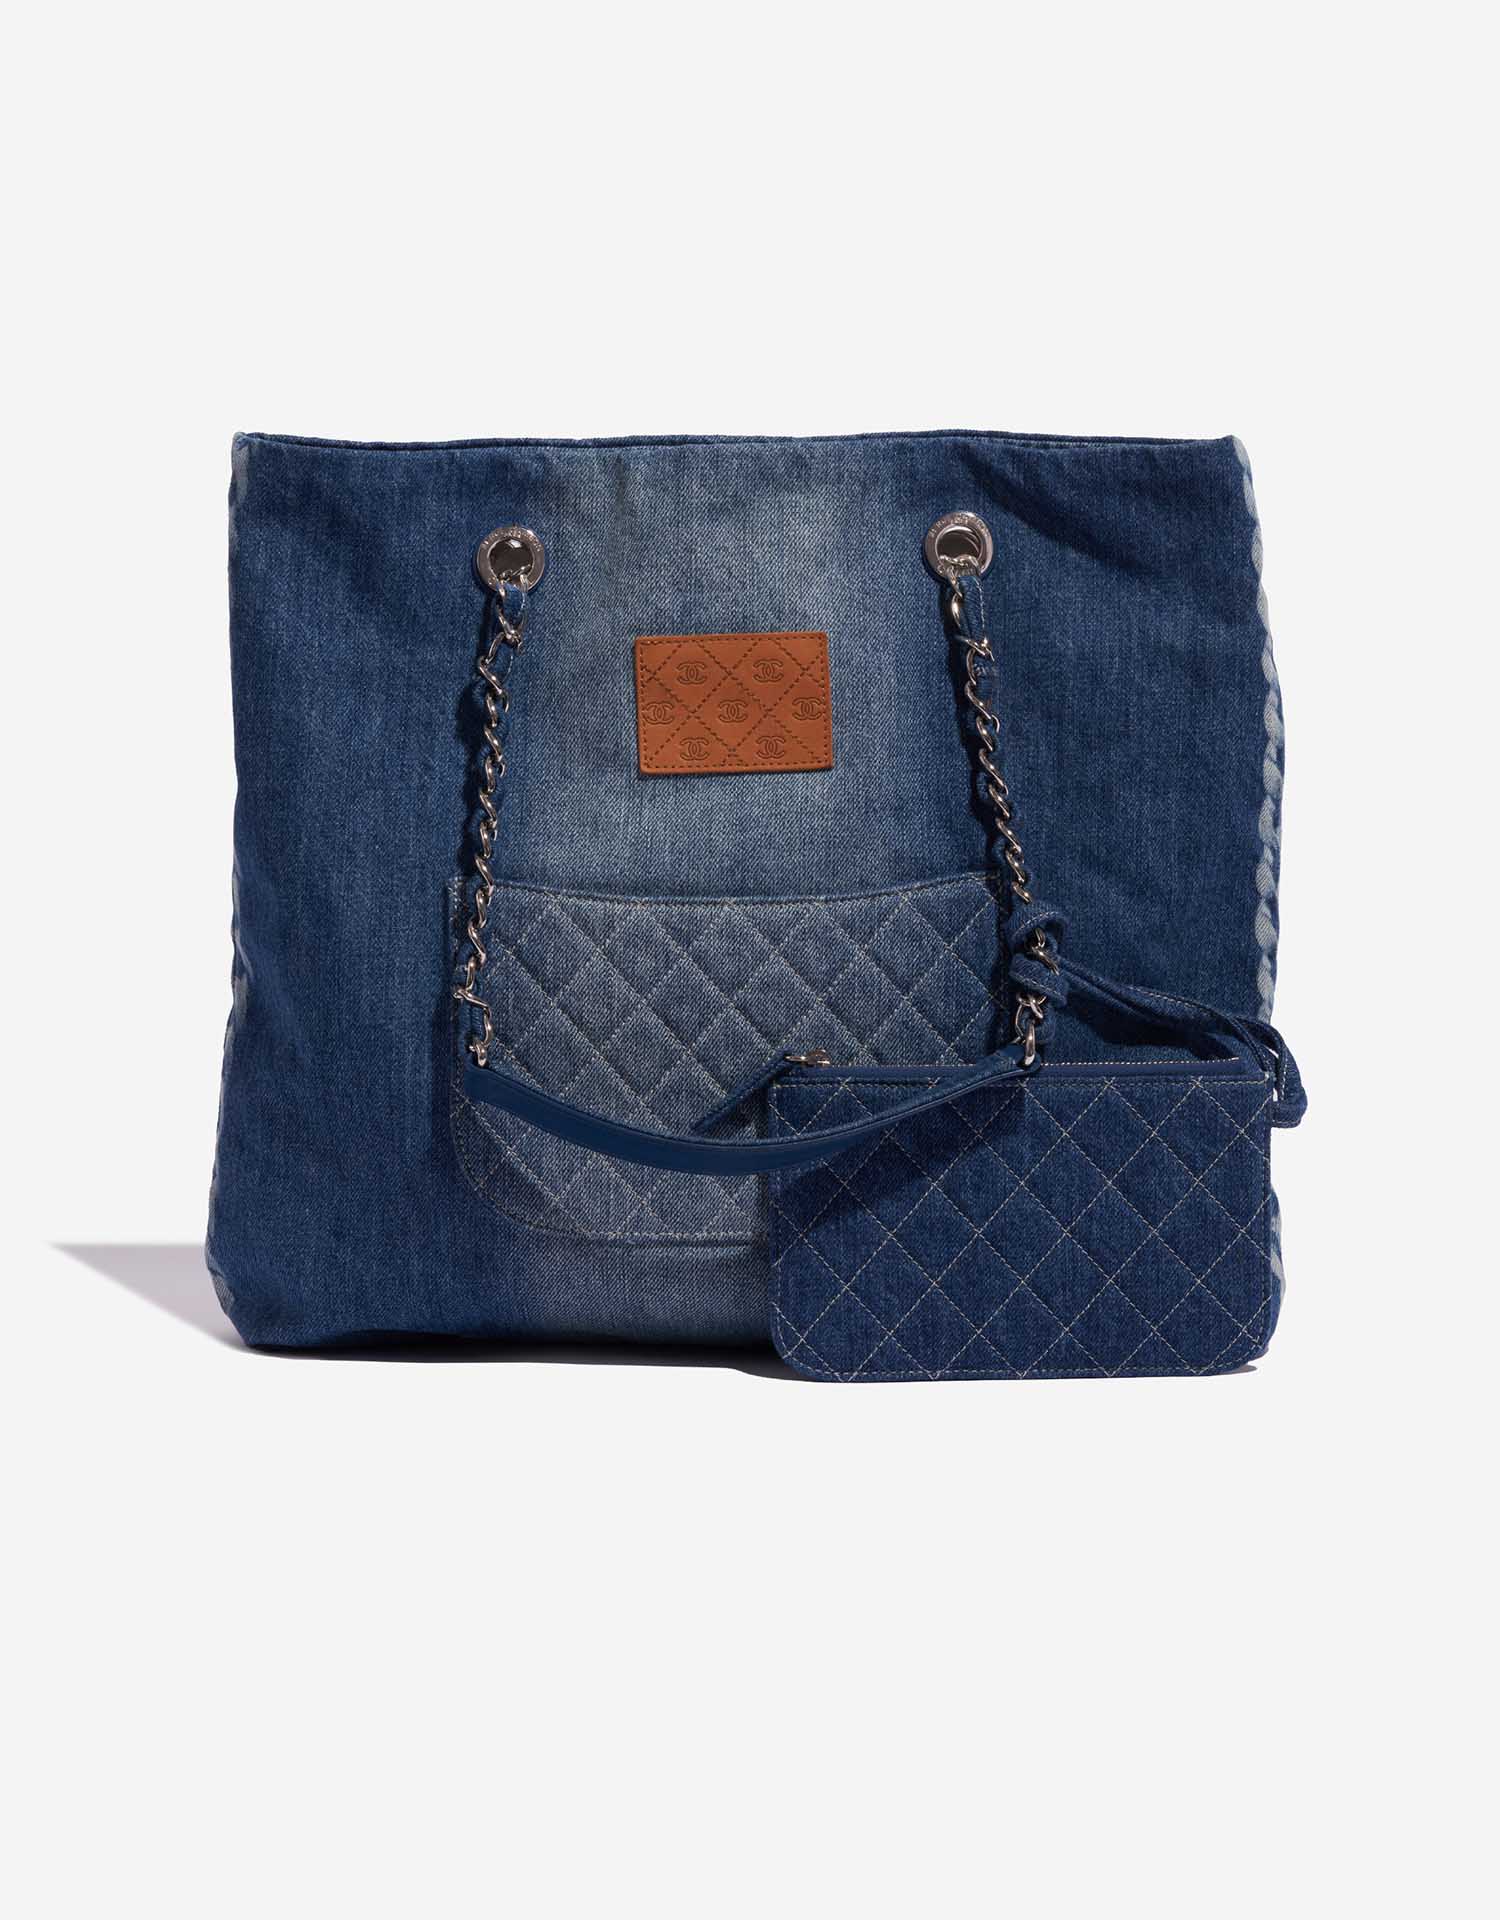 Snag the Latest CHANEL Denim Exterior Tote Bags & Handbags for Women with  Fast and Free Shipping. Authenticity Guaranteed on Designer Handbags $500+  at .